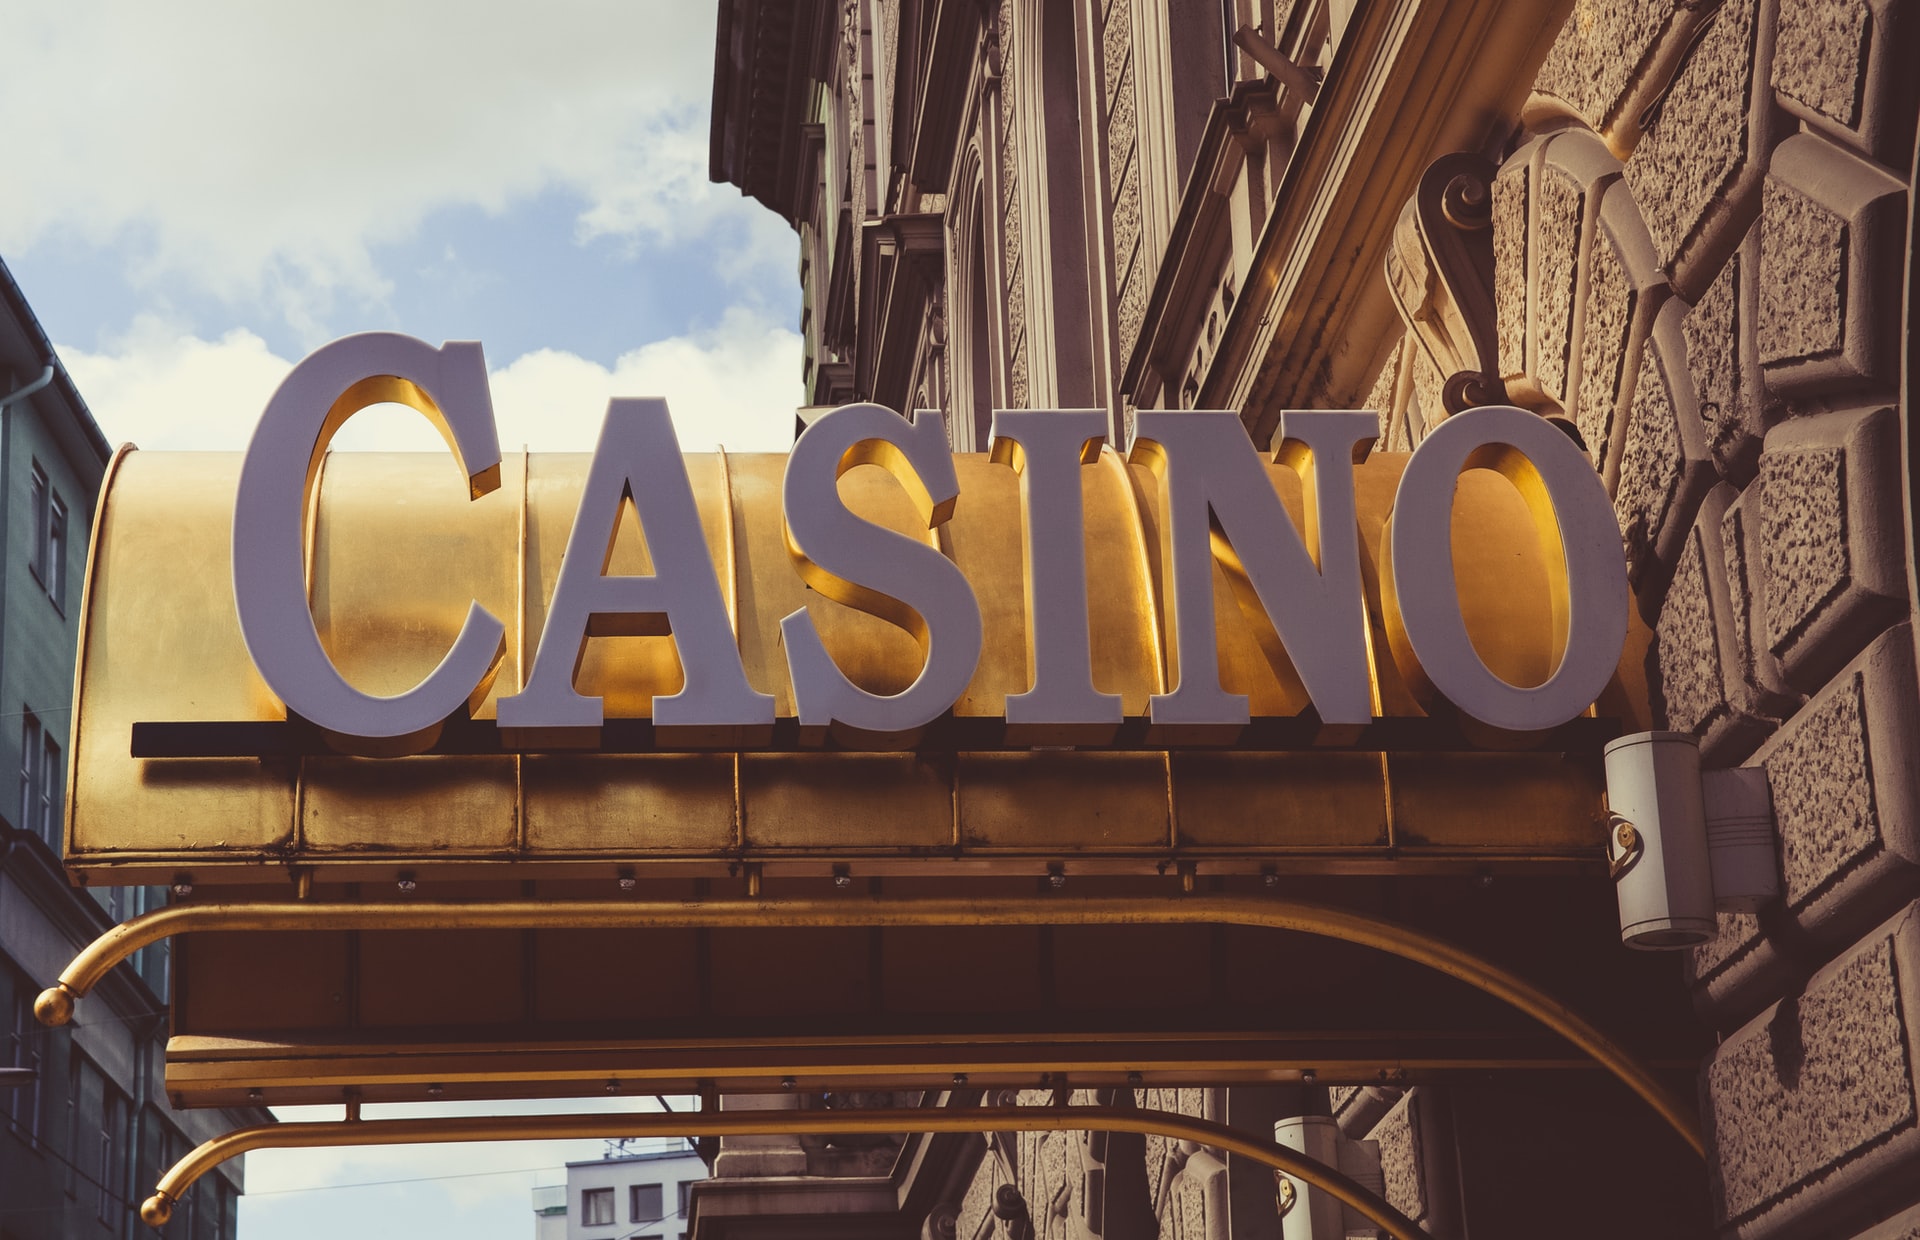 Best Online Casino: 3 Easy Tips to Find the Most Trusted One